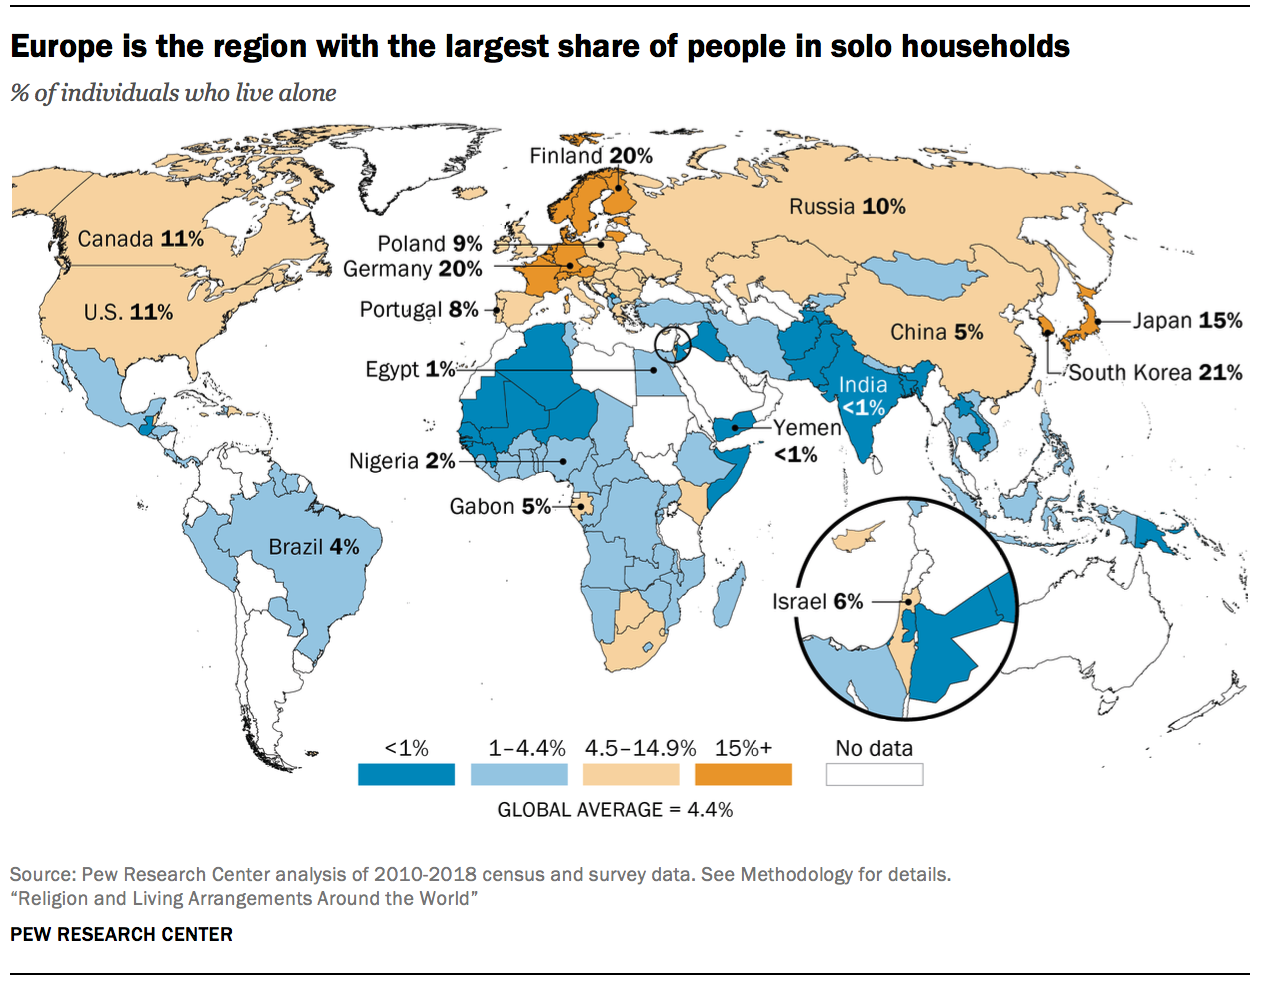 Europe is the region with the largest share of people in solo households